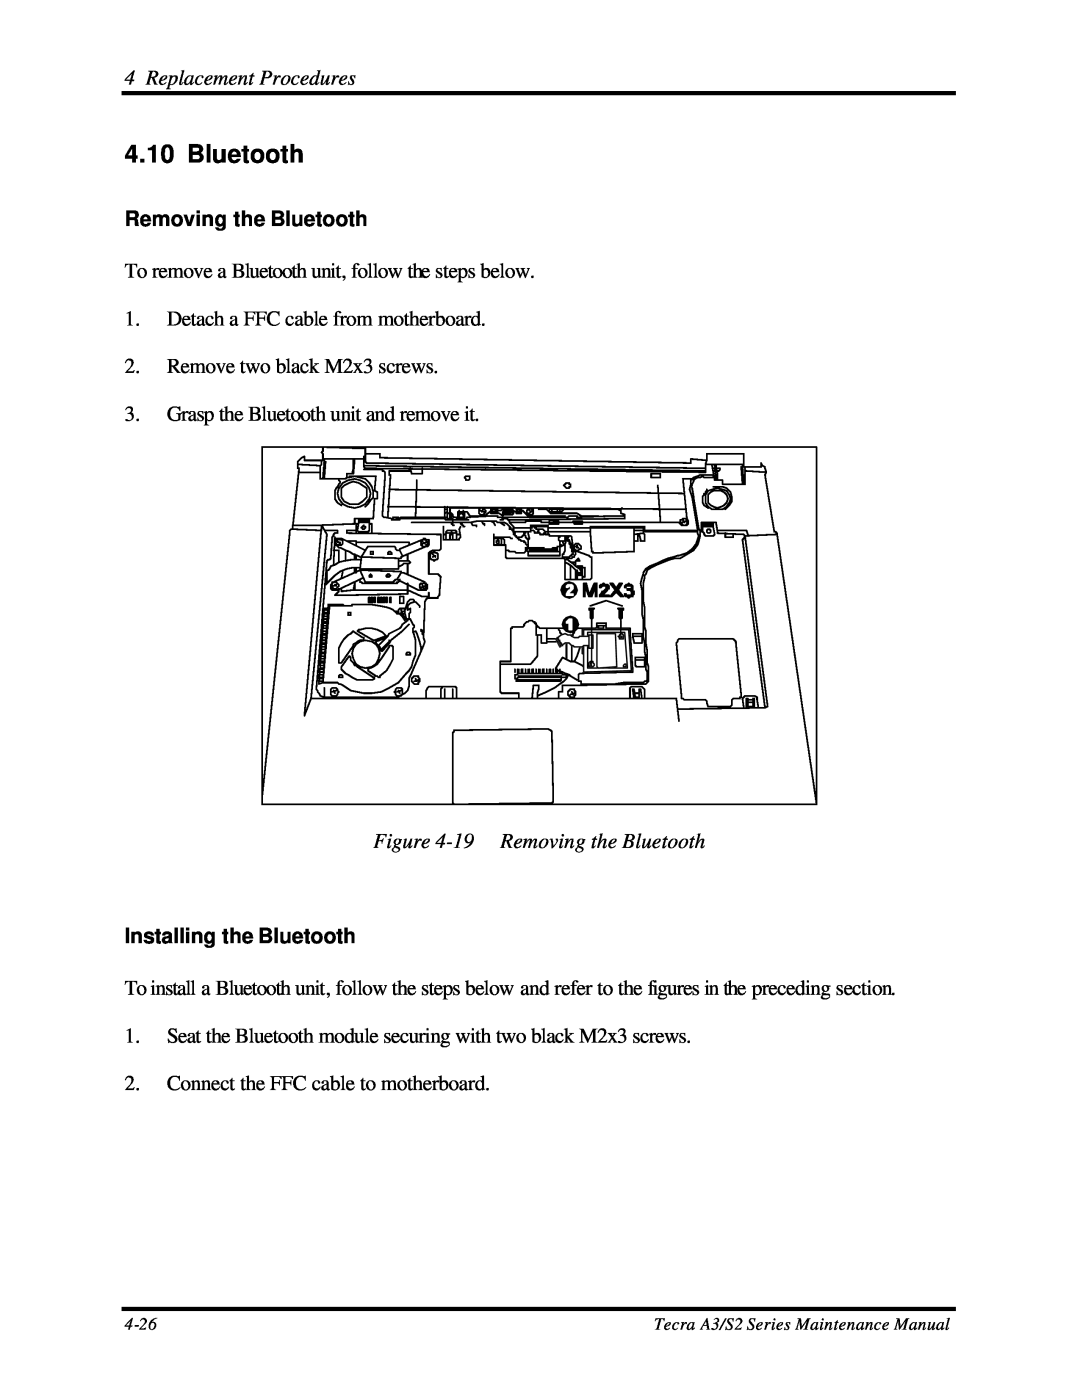 Toshiba S2 manual 19 Removing the Bluetooth, Installing the Bluetooth, Replacement Procedures 